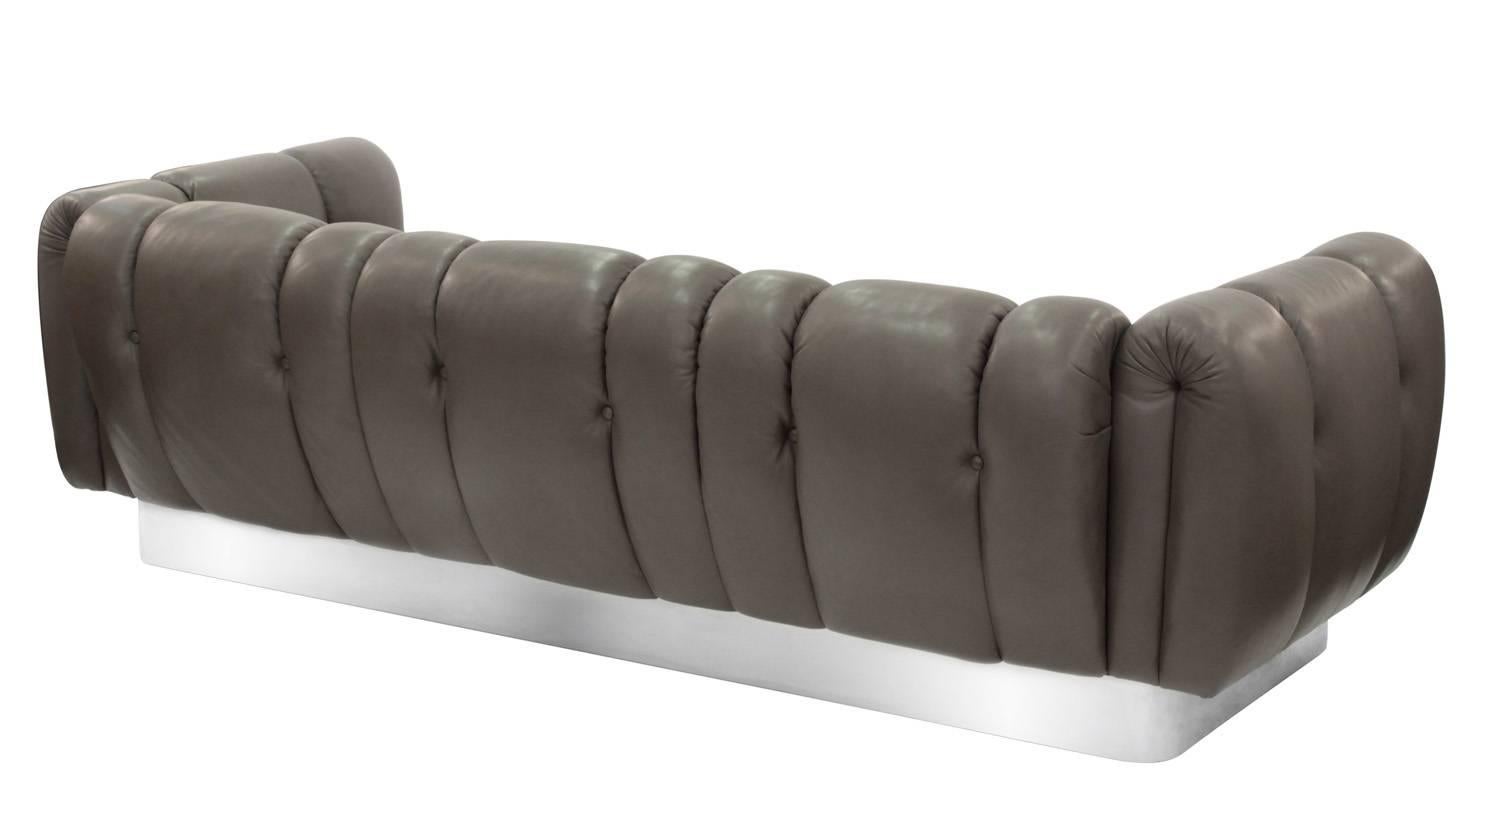 Sofa upholstered in channeled grey leather with steel base attributed to Leon Rosen for Pace Collection, American, 1970s.
           